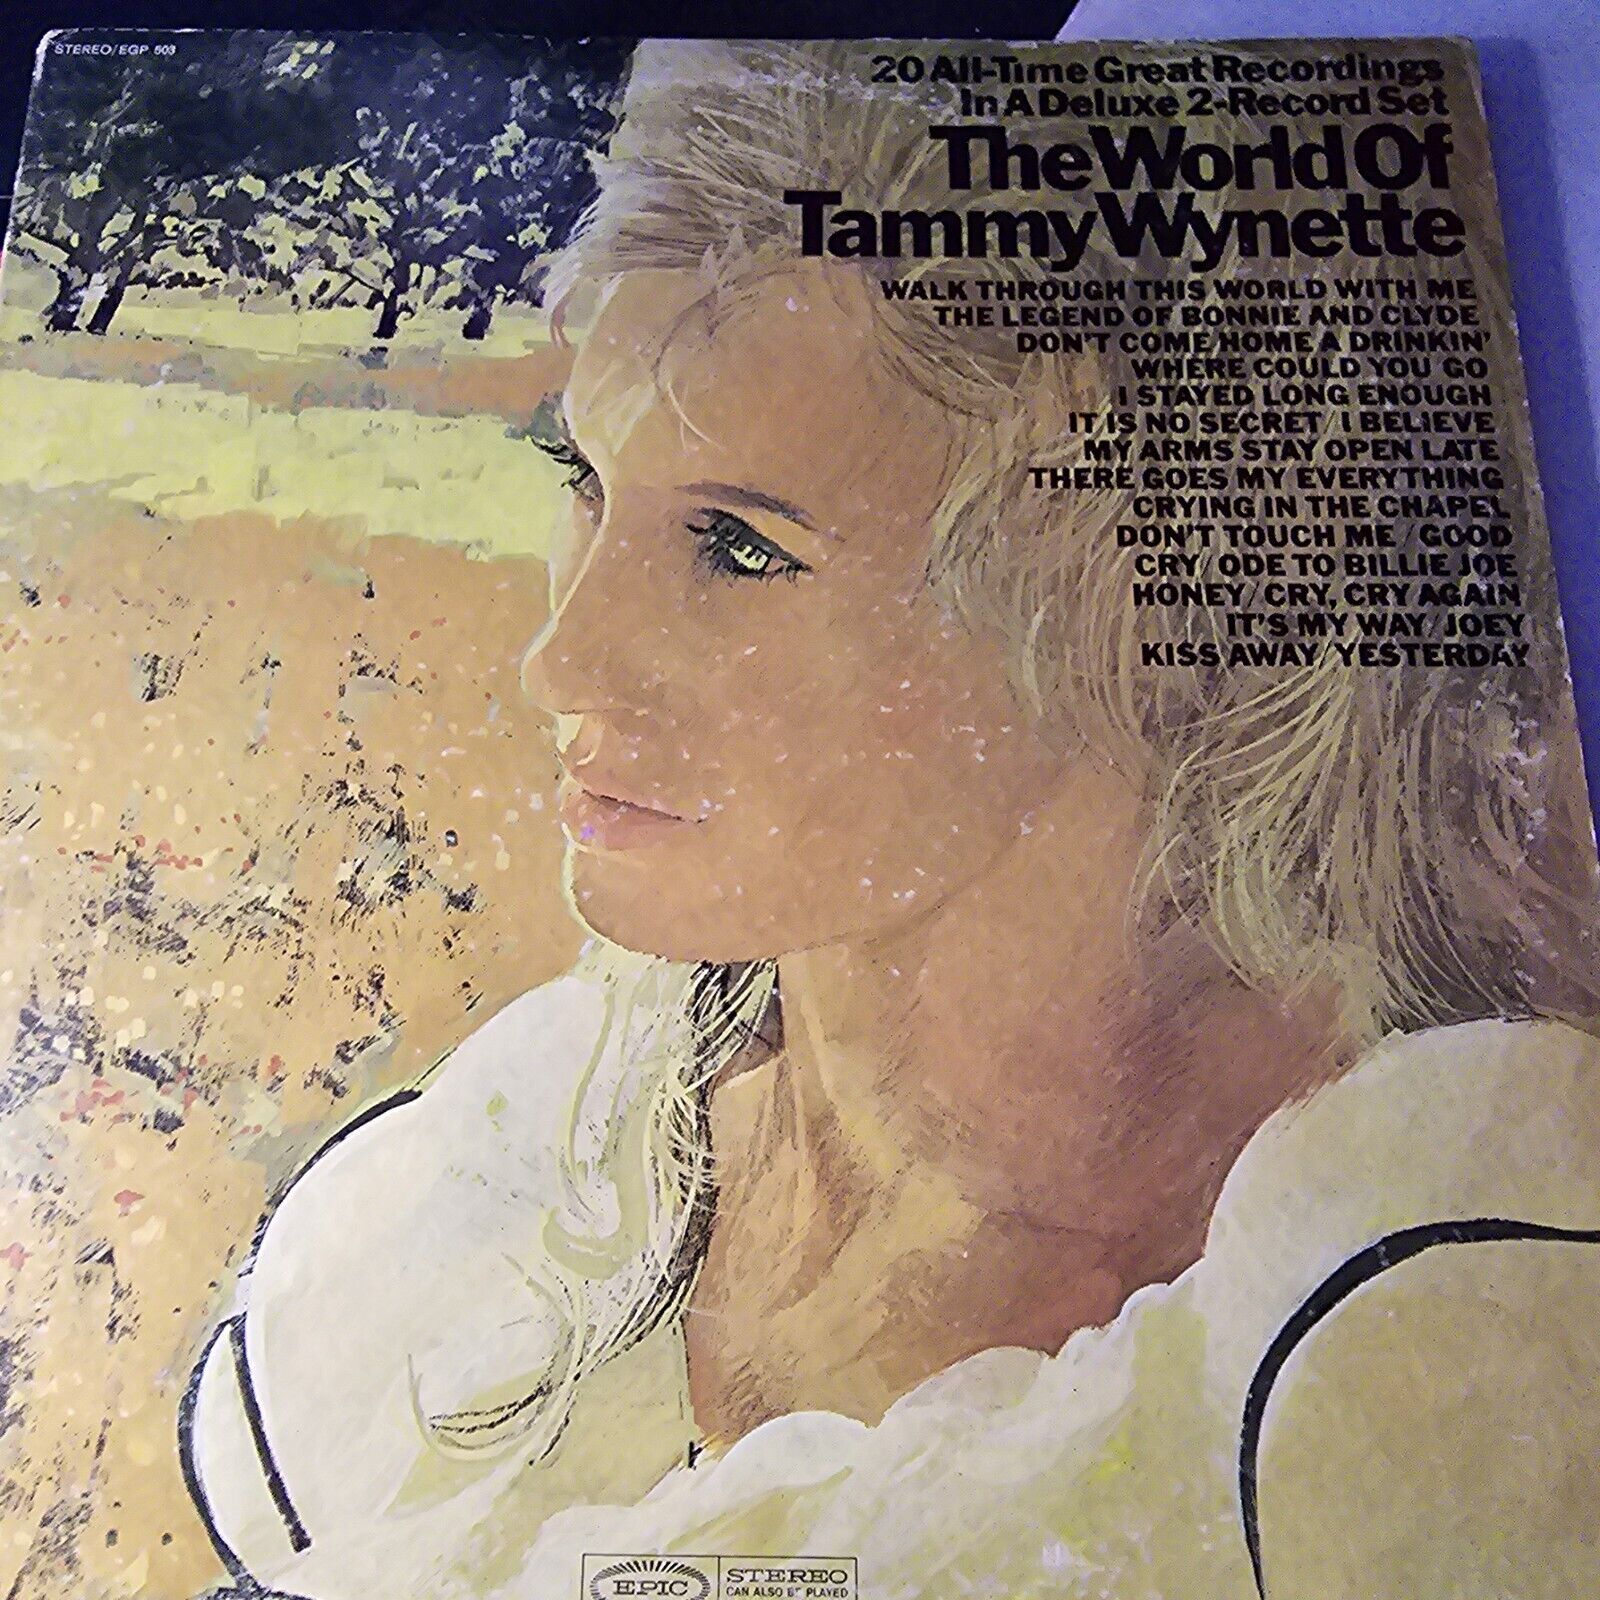 TAMMY WYNETTE - The World of: 2LP Greatest Hits 1970 Epic EGP503  Vinyl Record